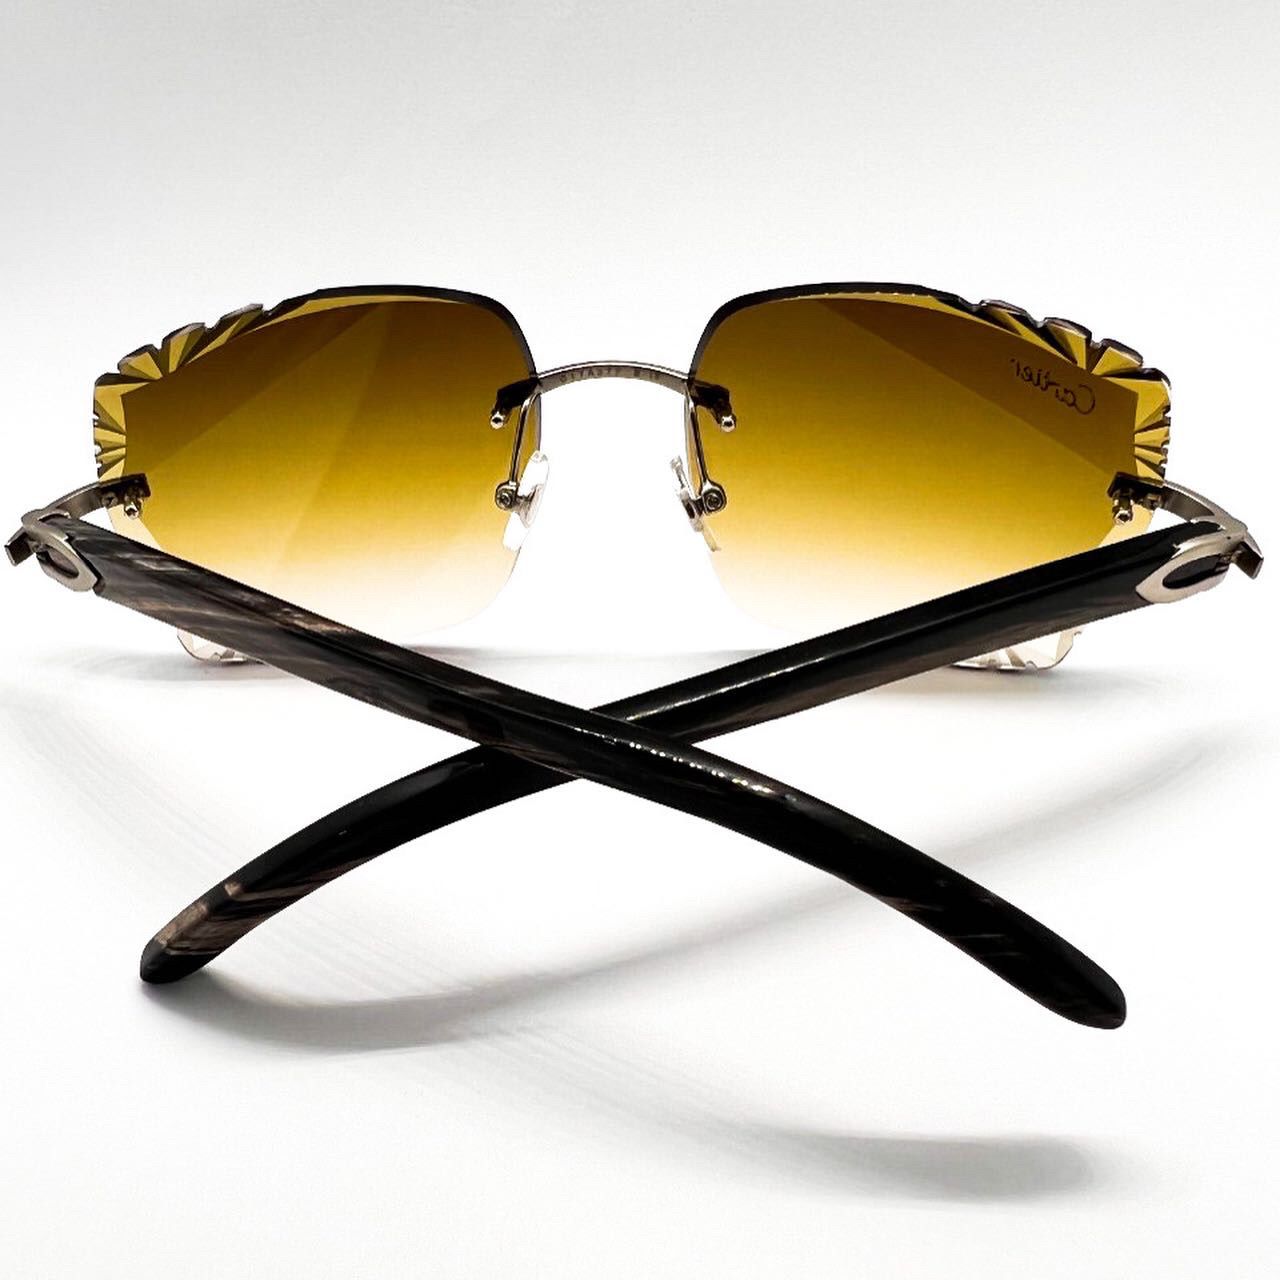 Decor C Brushed Silver Black Buffs with Square Diamond Cut Lenses